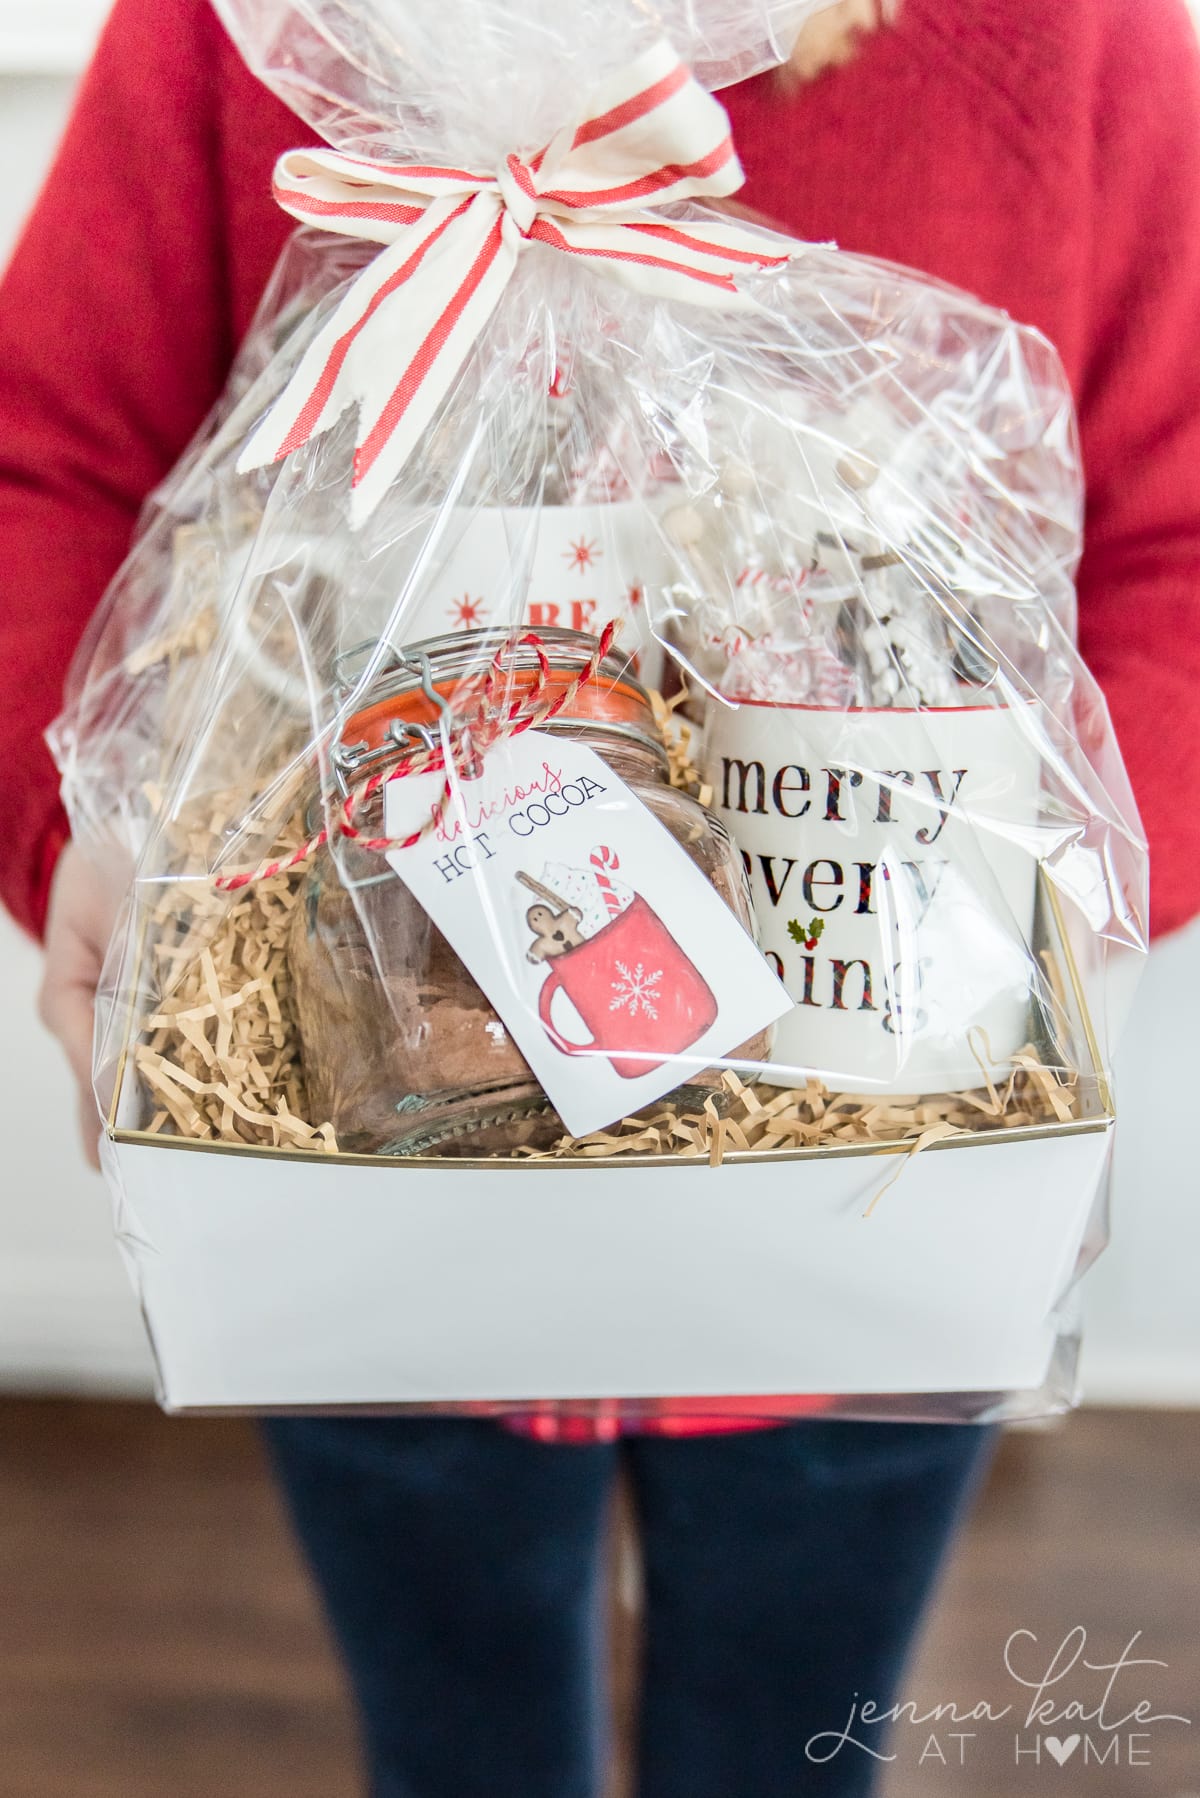 Woman holding the homemade hot chocolate mix gift basket